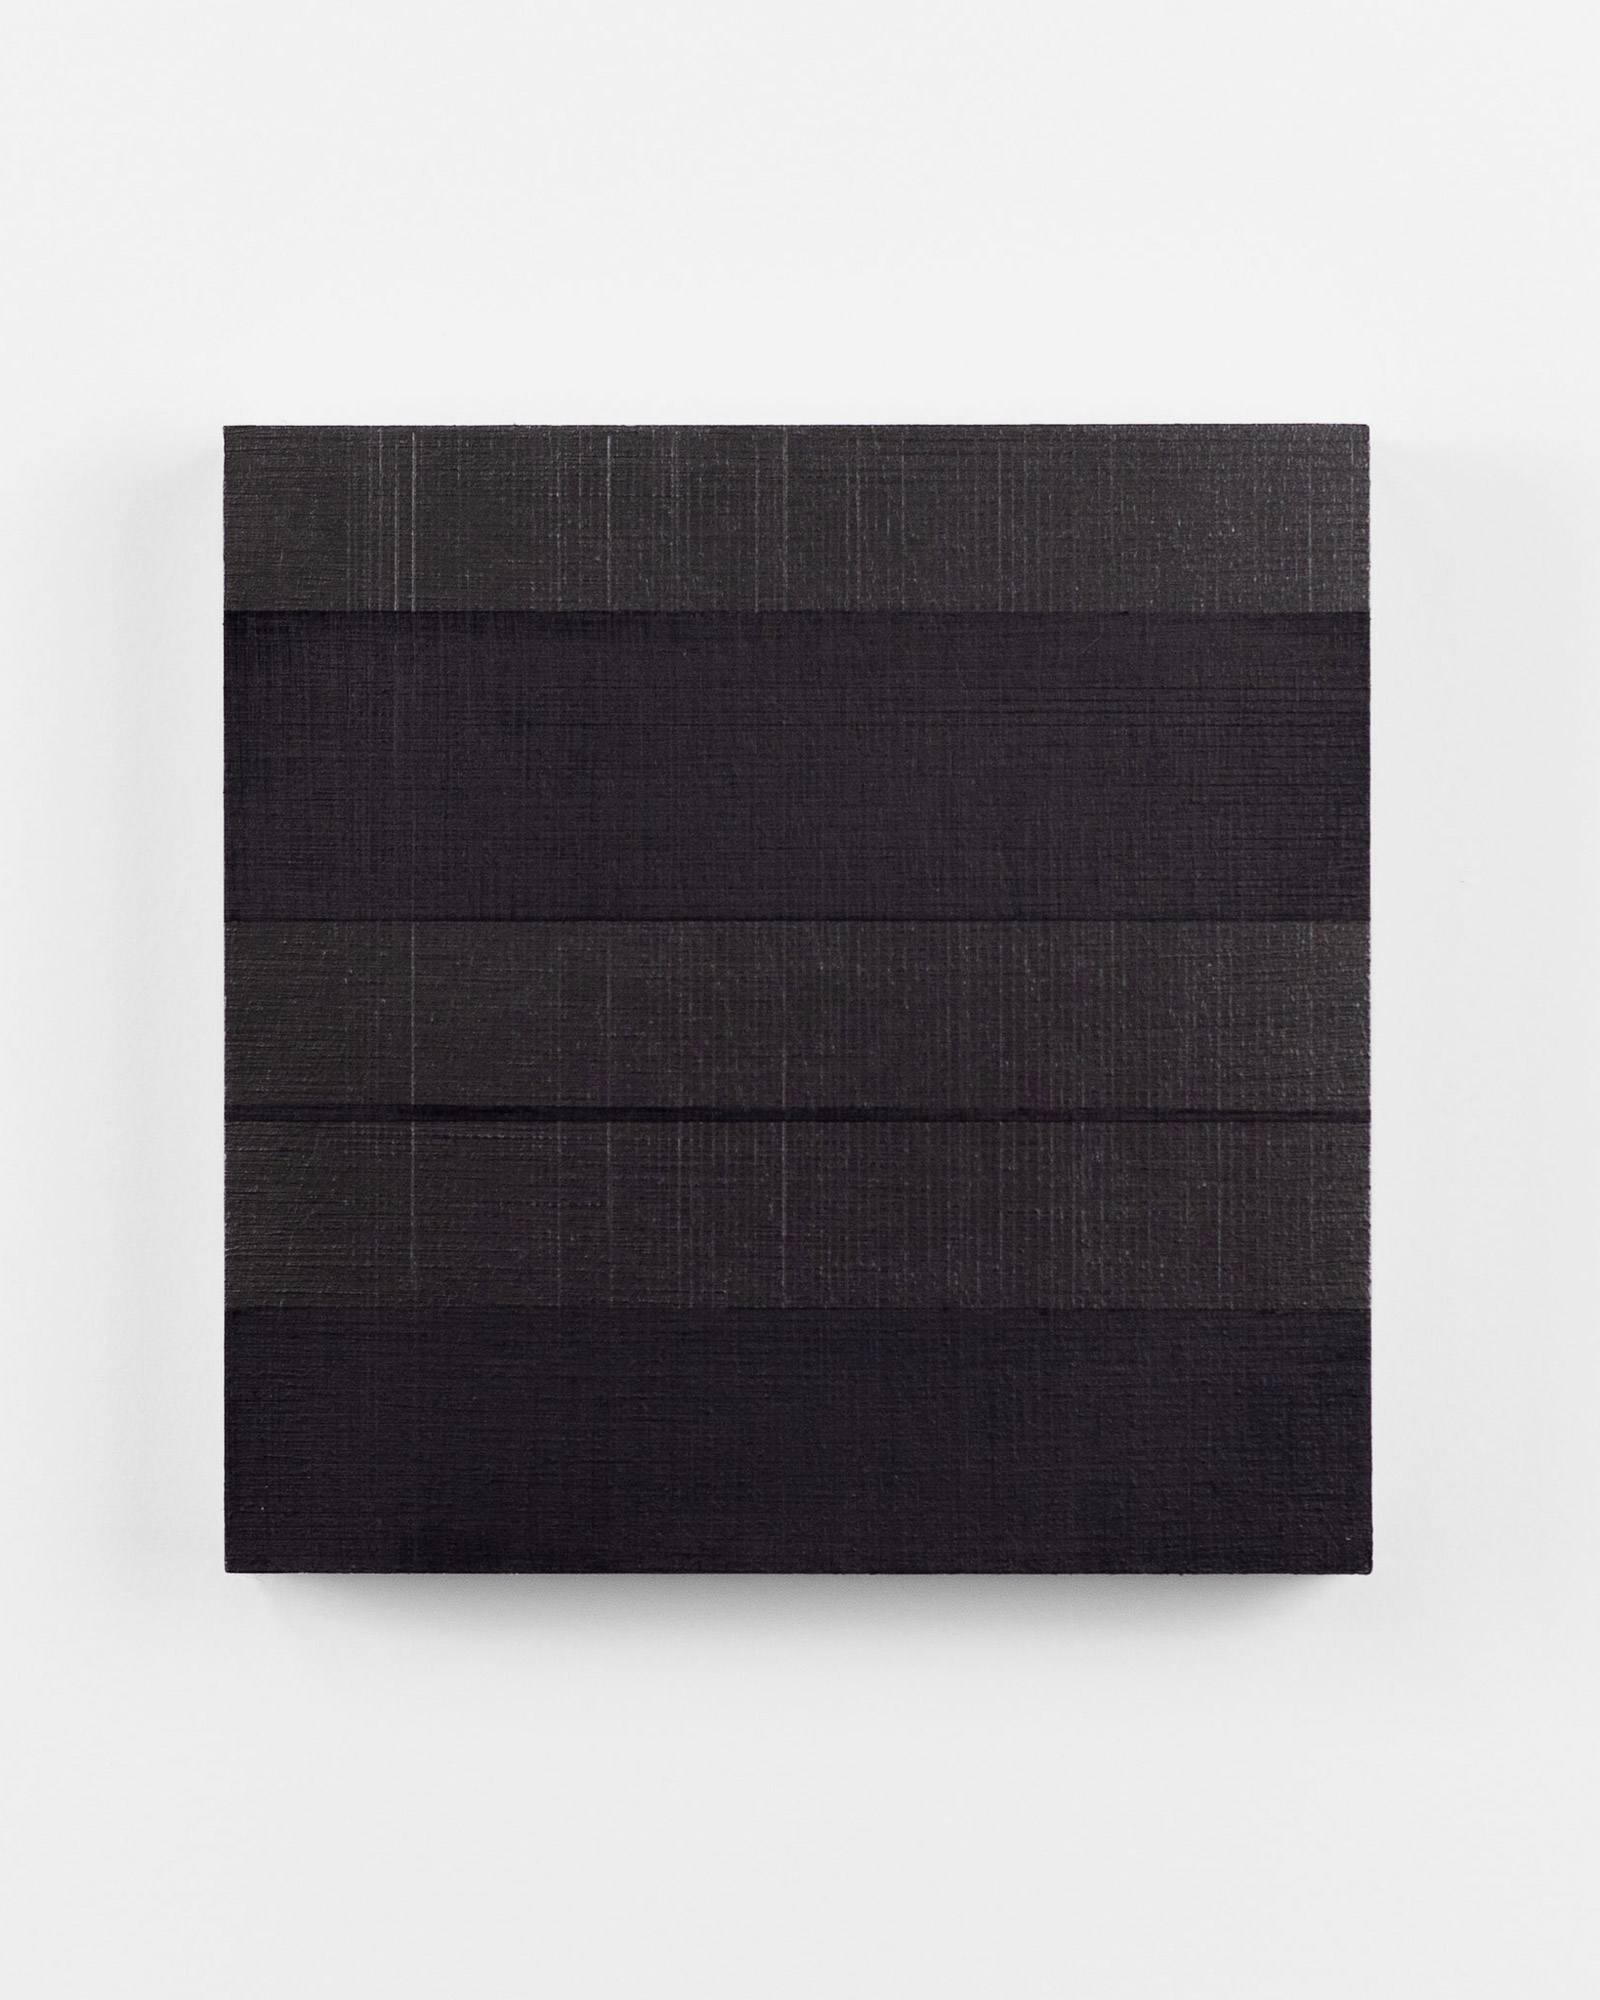 Yvonne Willemse, Running gray 21, 2023, oil paint and graphite on birch plywood 15 x 15 x 2.4 cm © The Artist